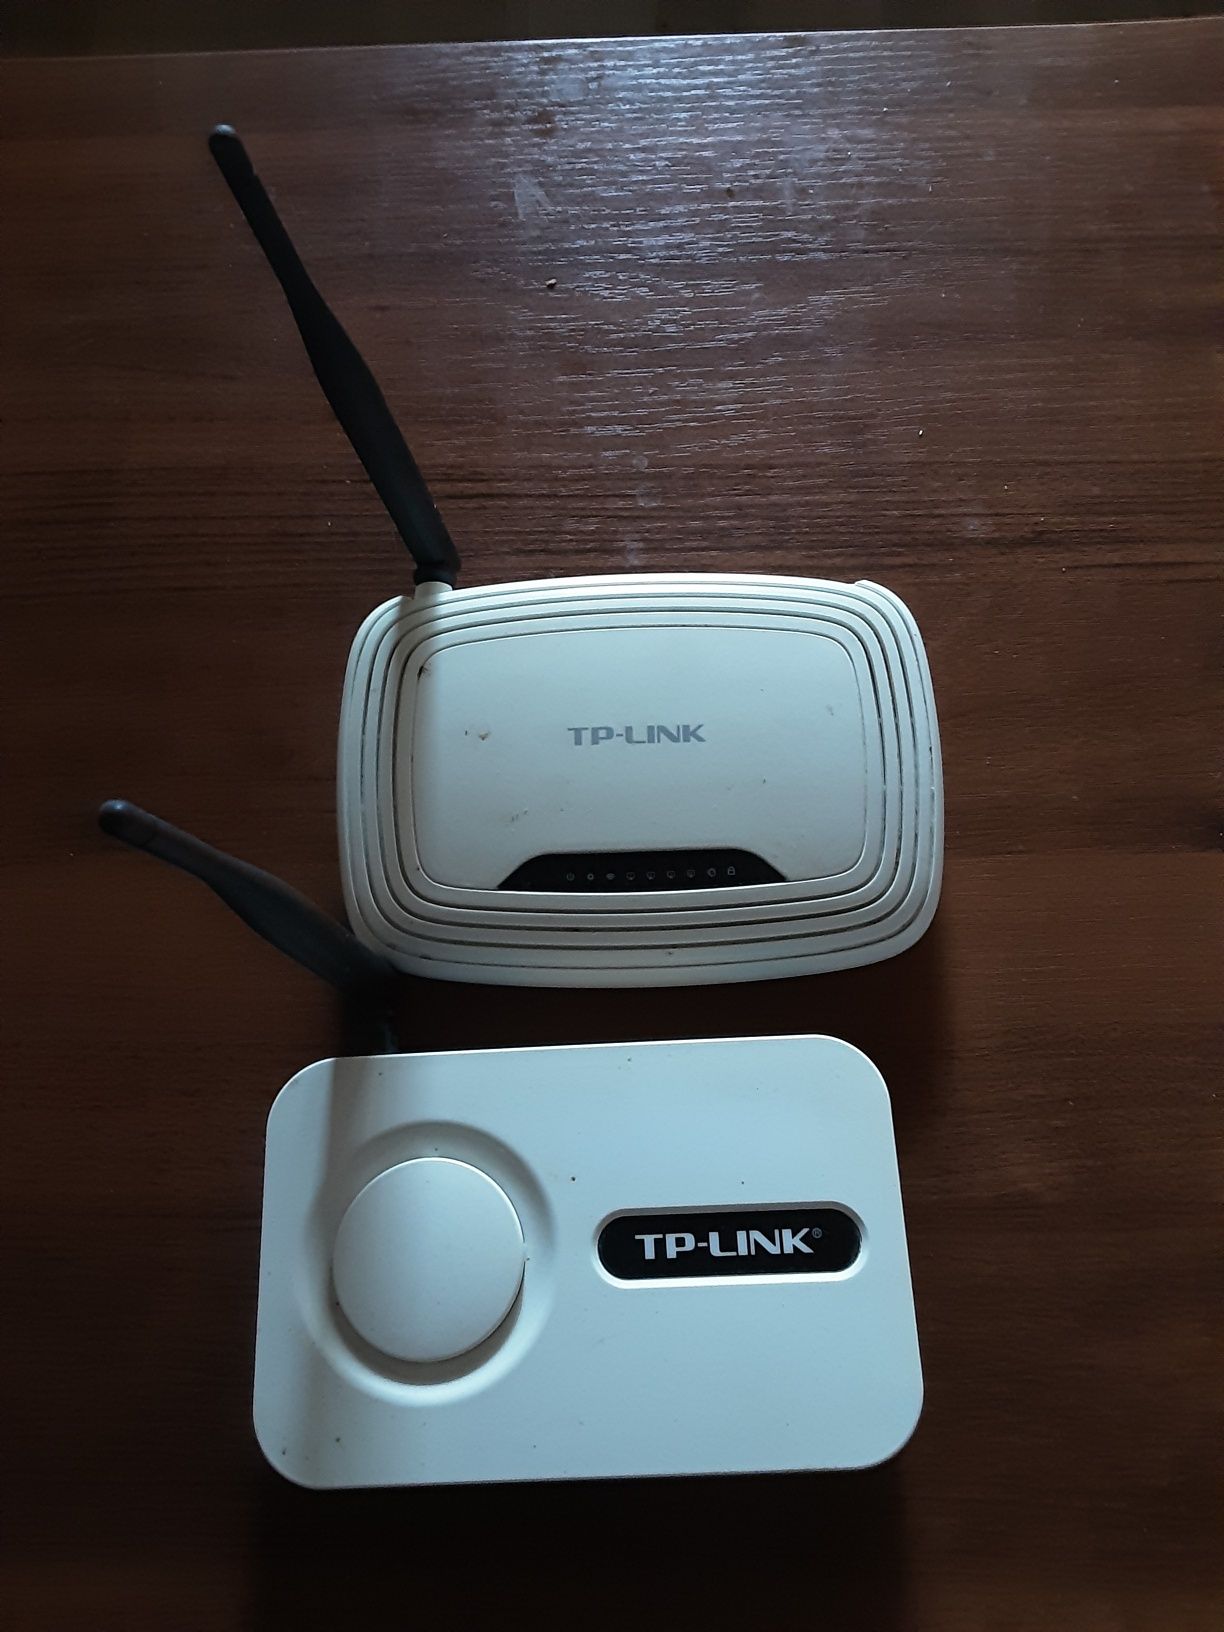 Routery TP-LINK tanio